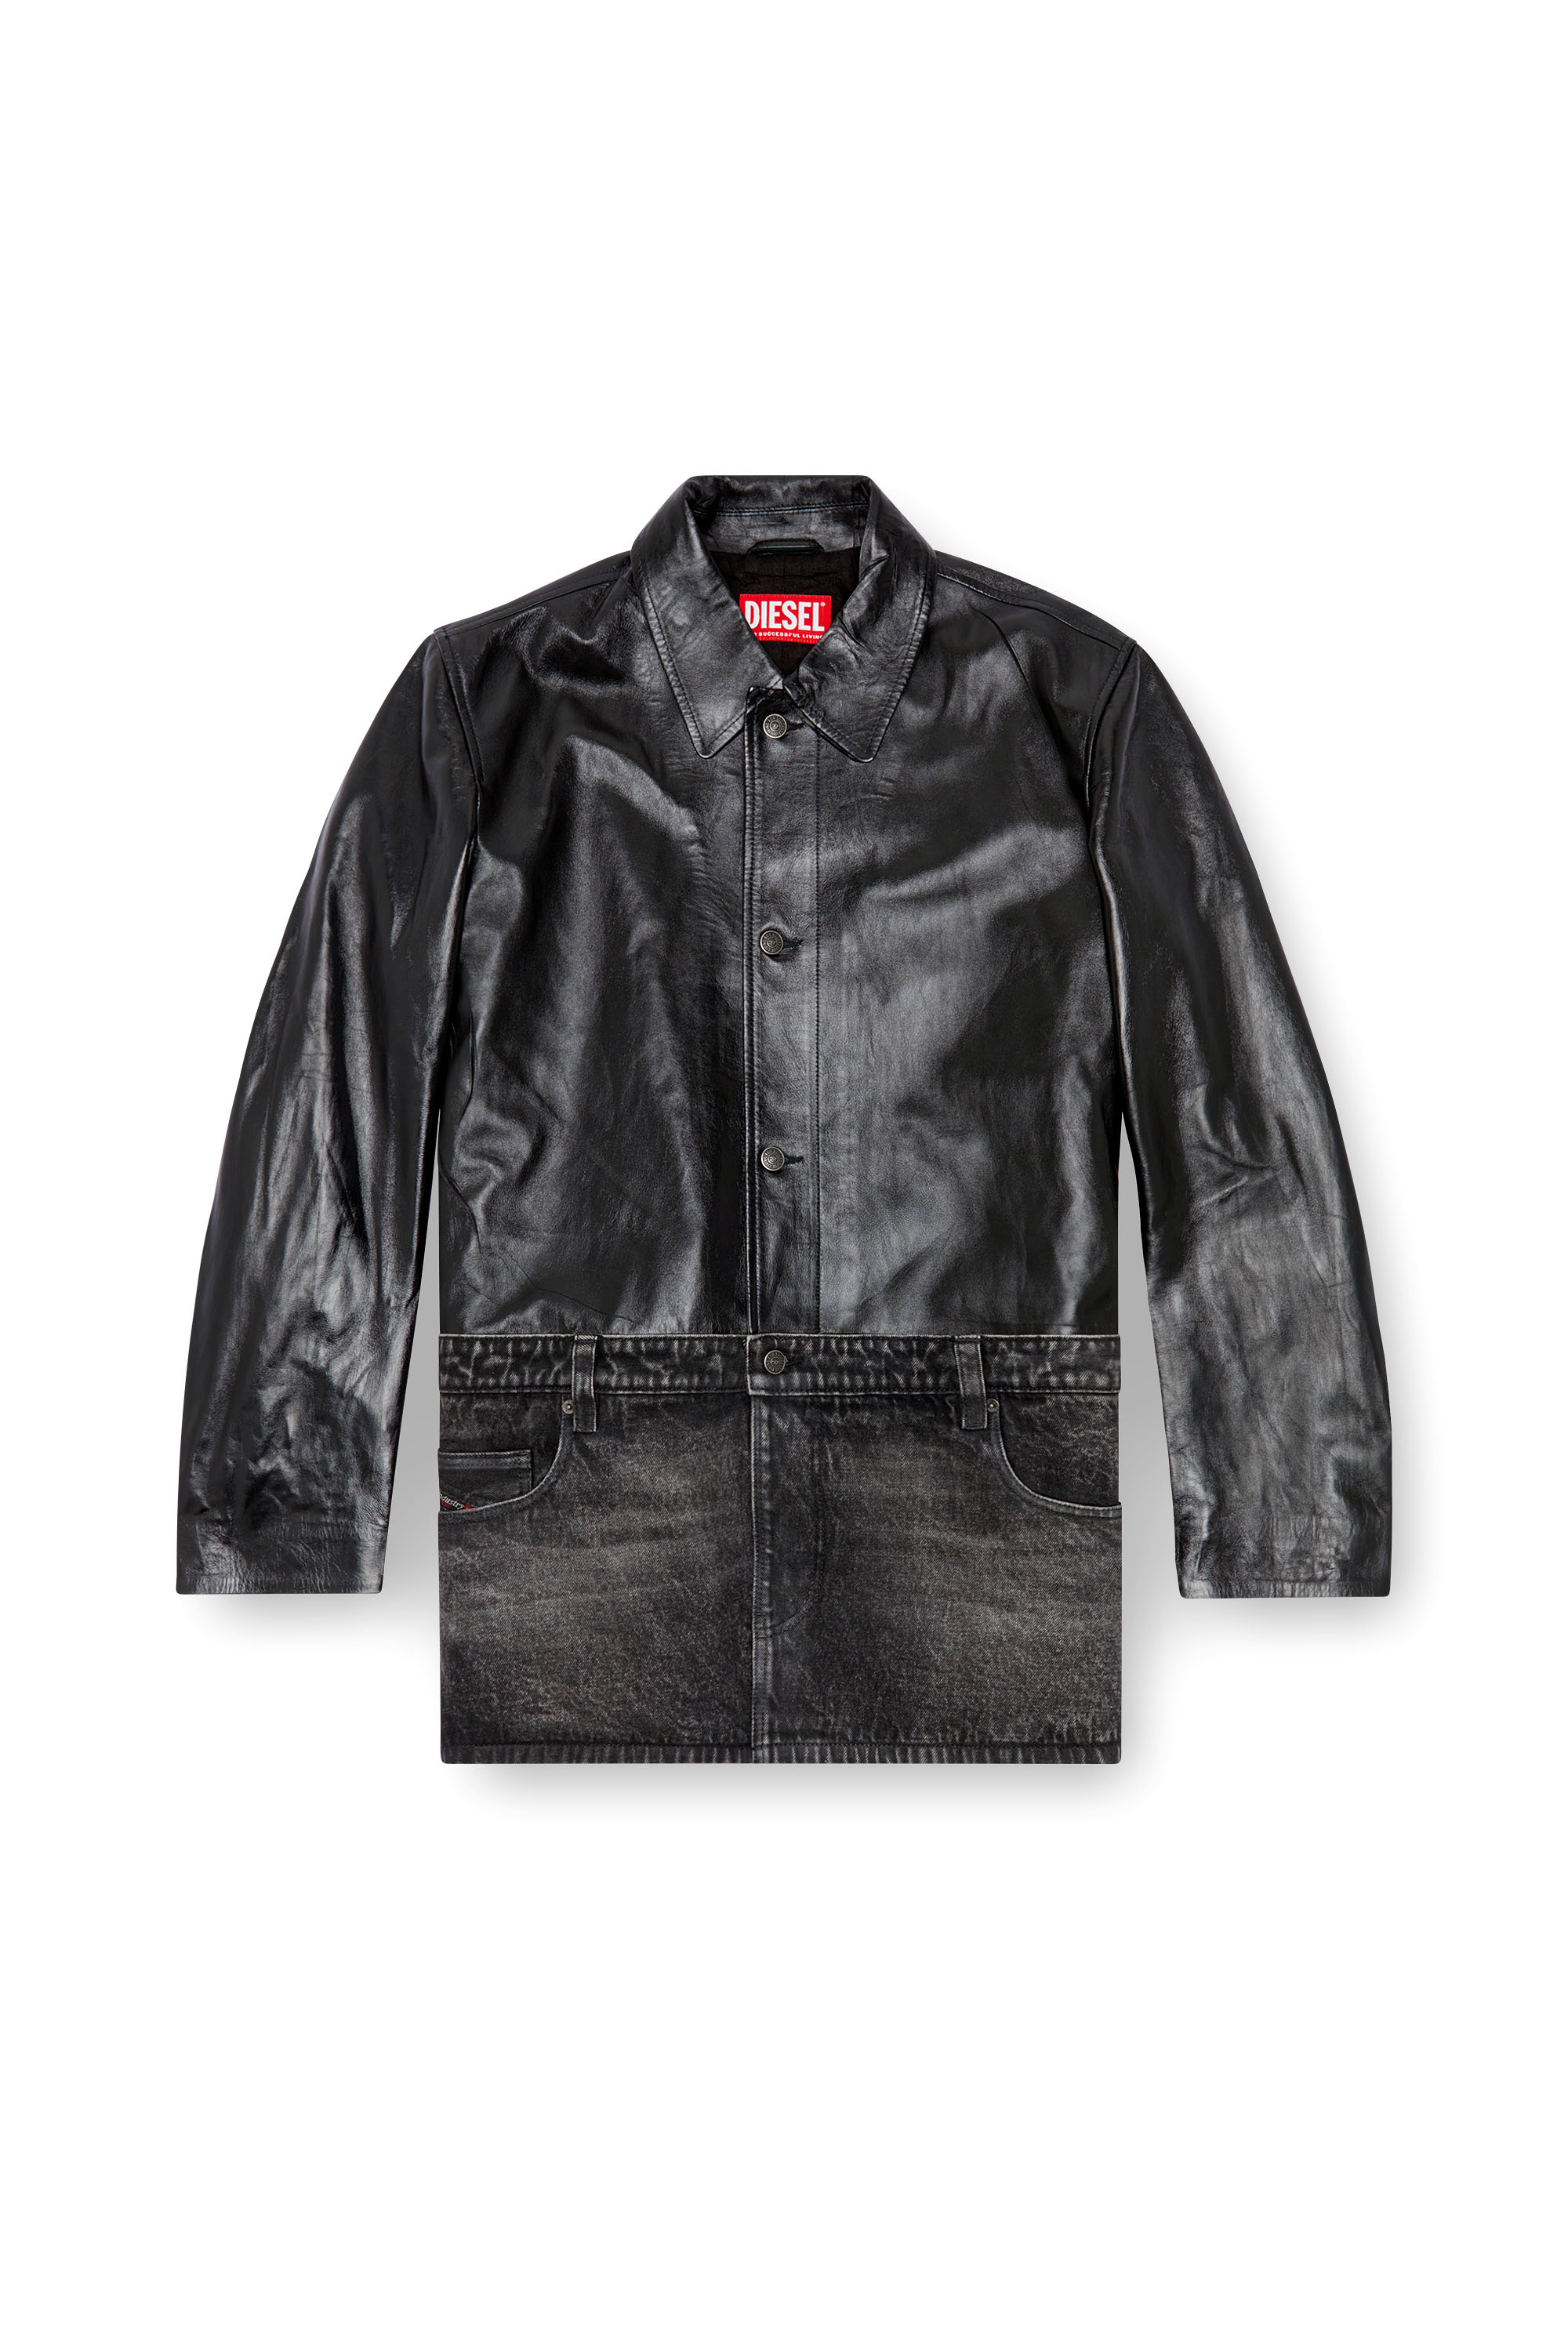 Diesel - L-BRETCH, Male Leather and denim shirt jacket in ブラック - Image 2